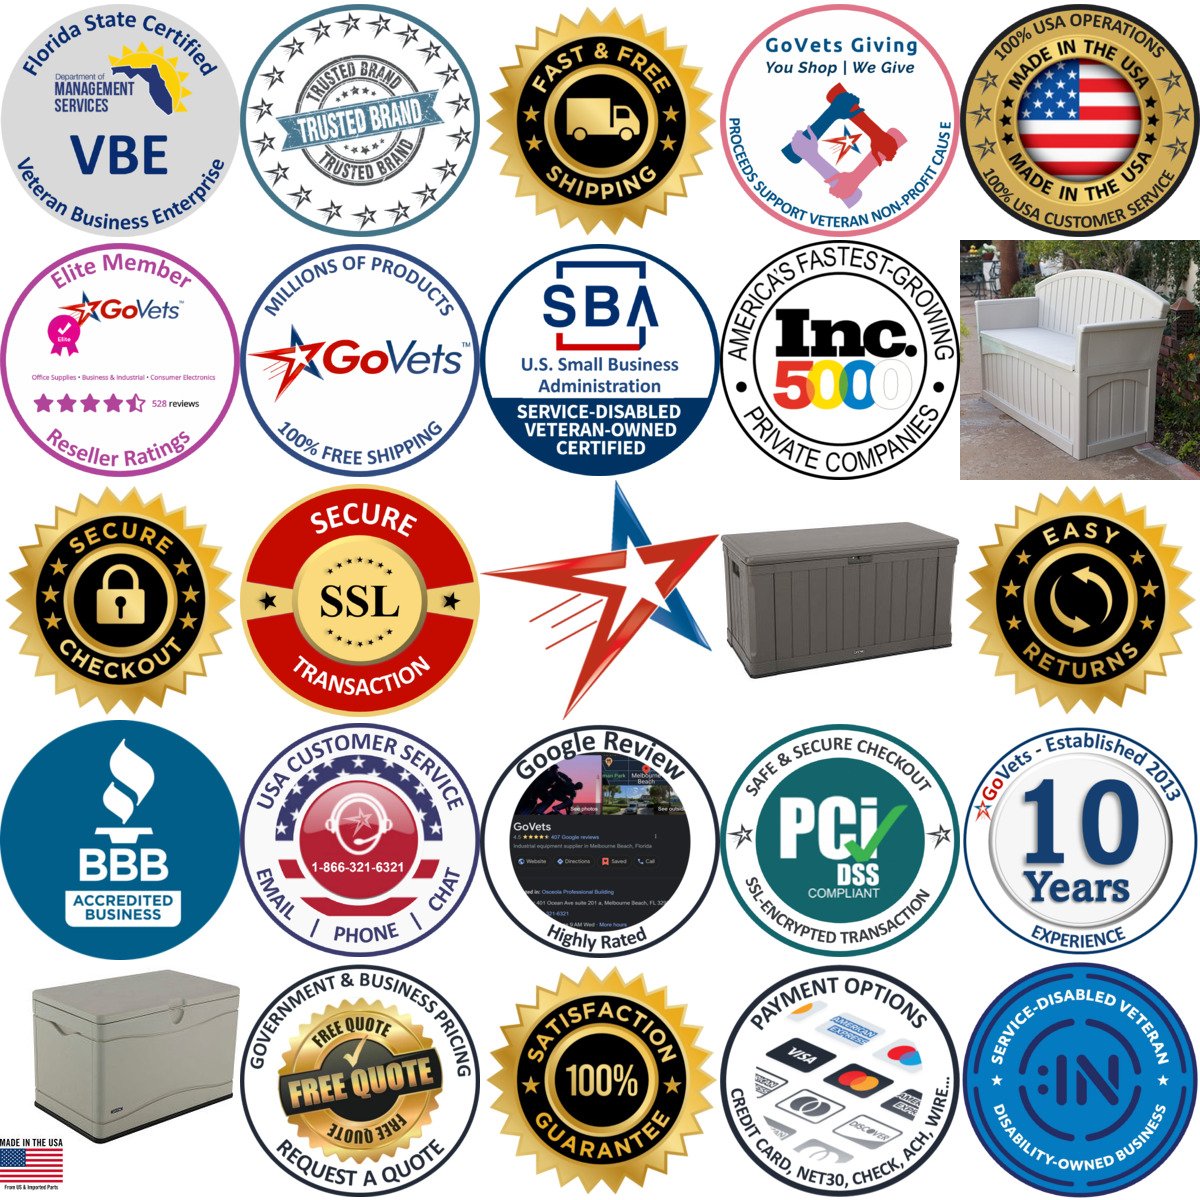 A selection of Deck Boxes products on GoVets